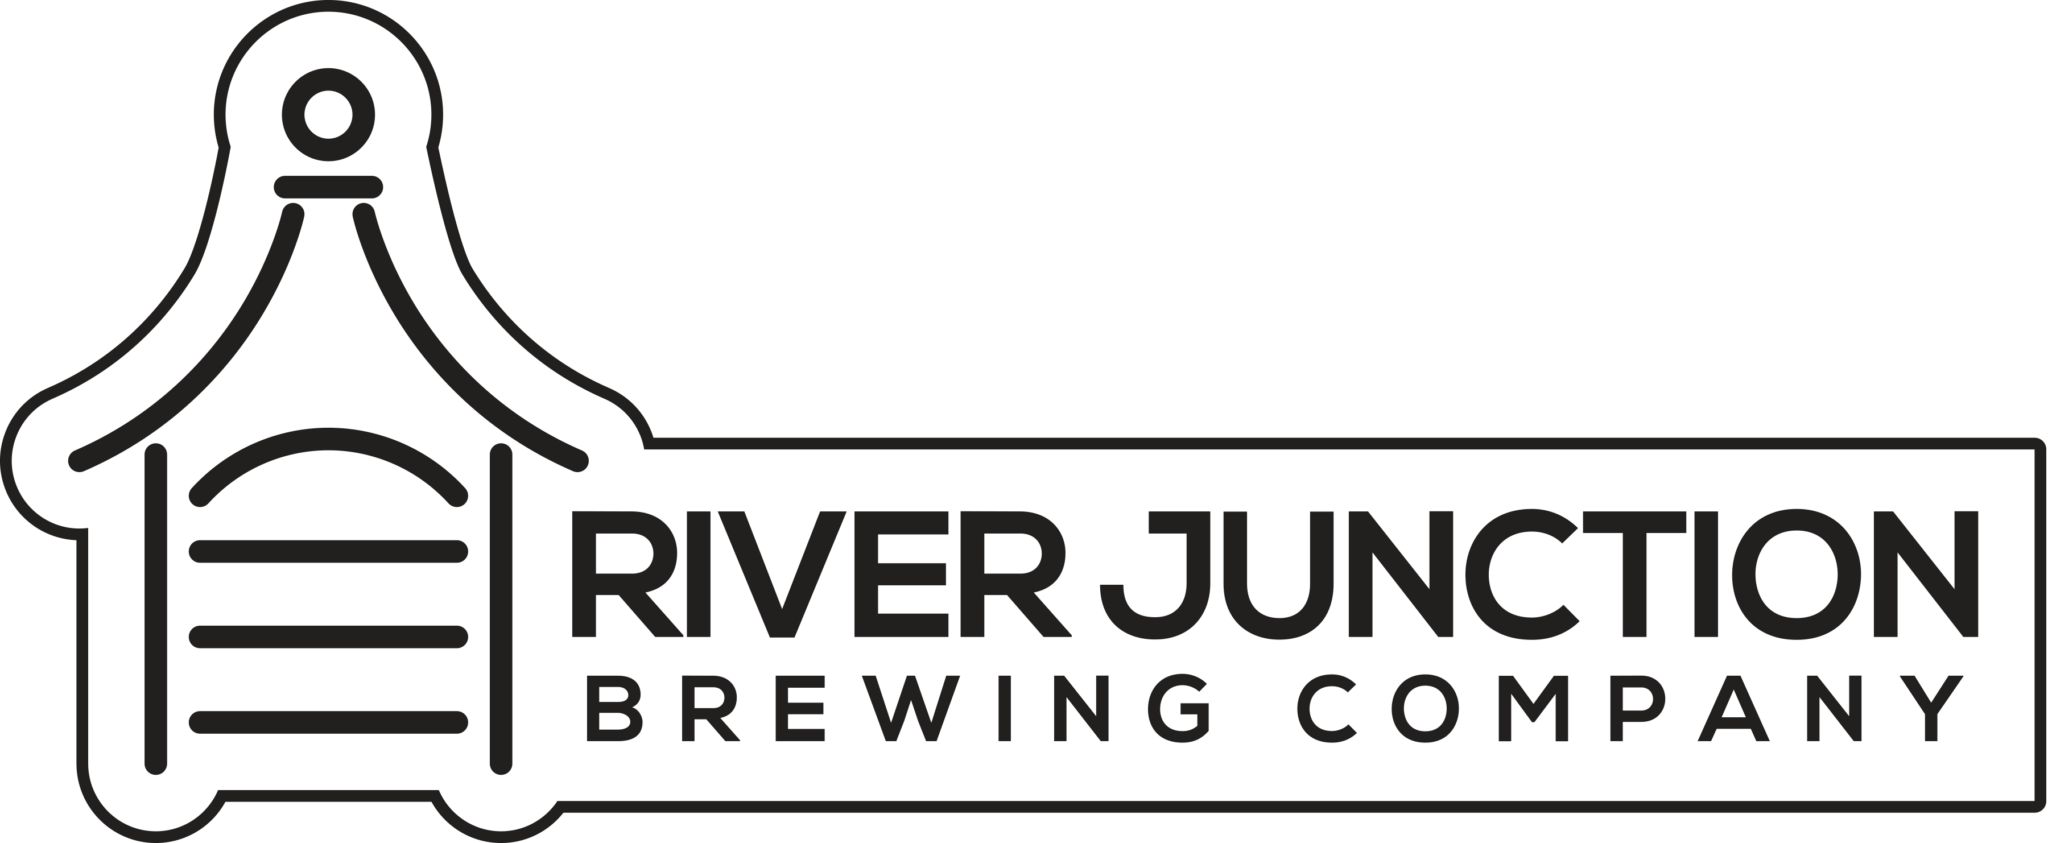 River Junction Brewing Co.